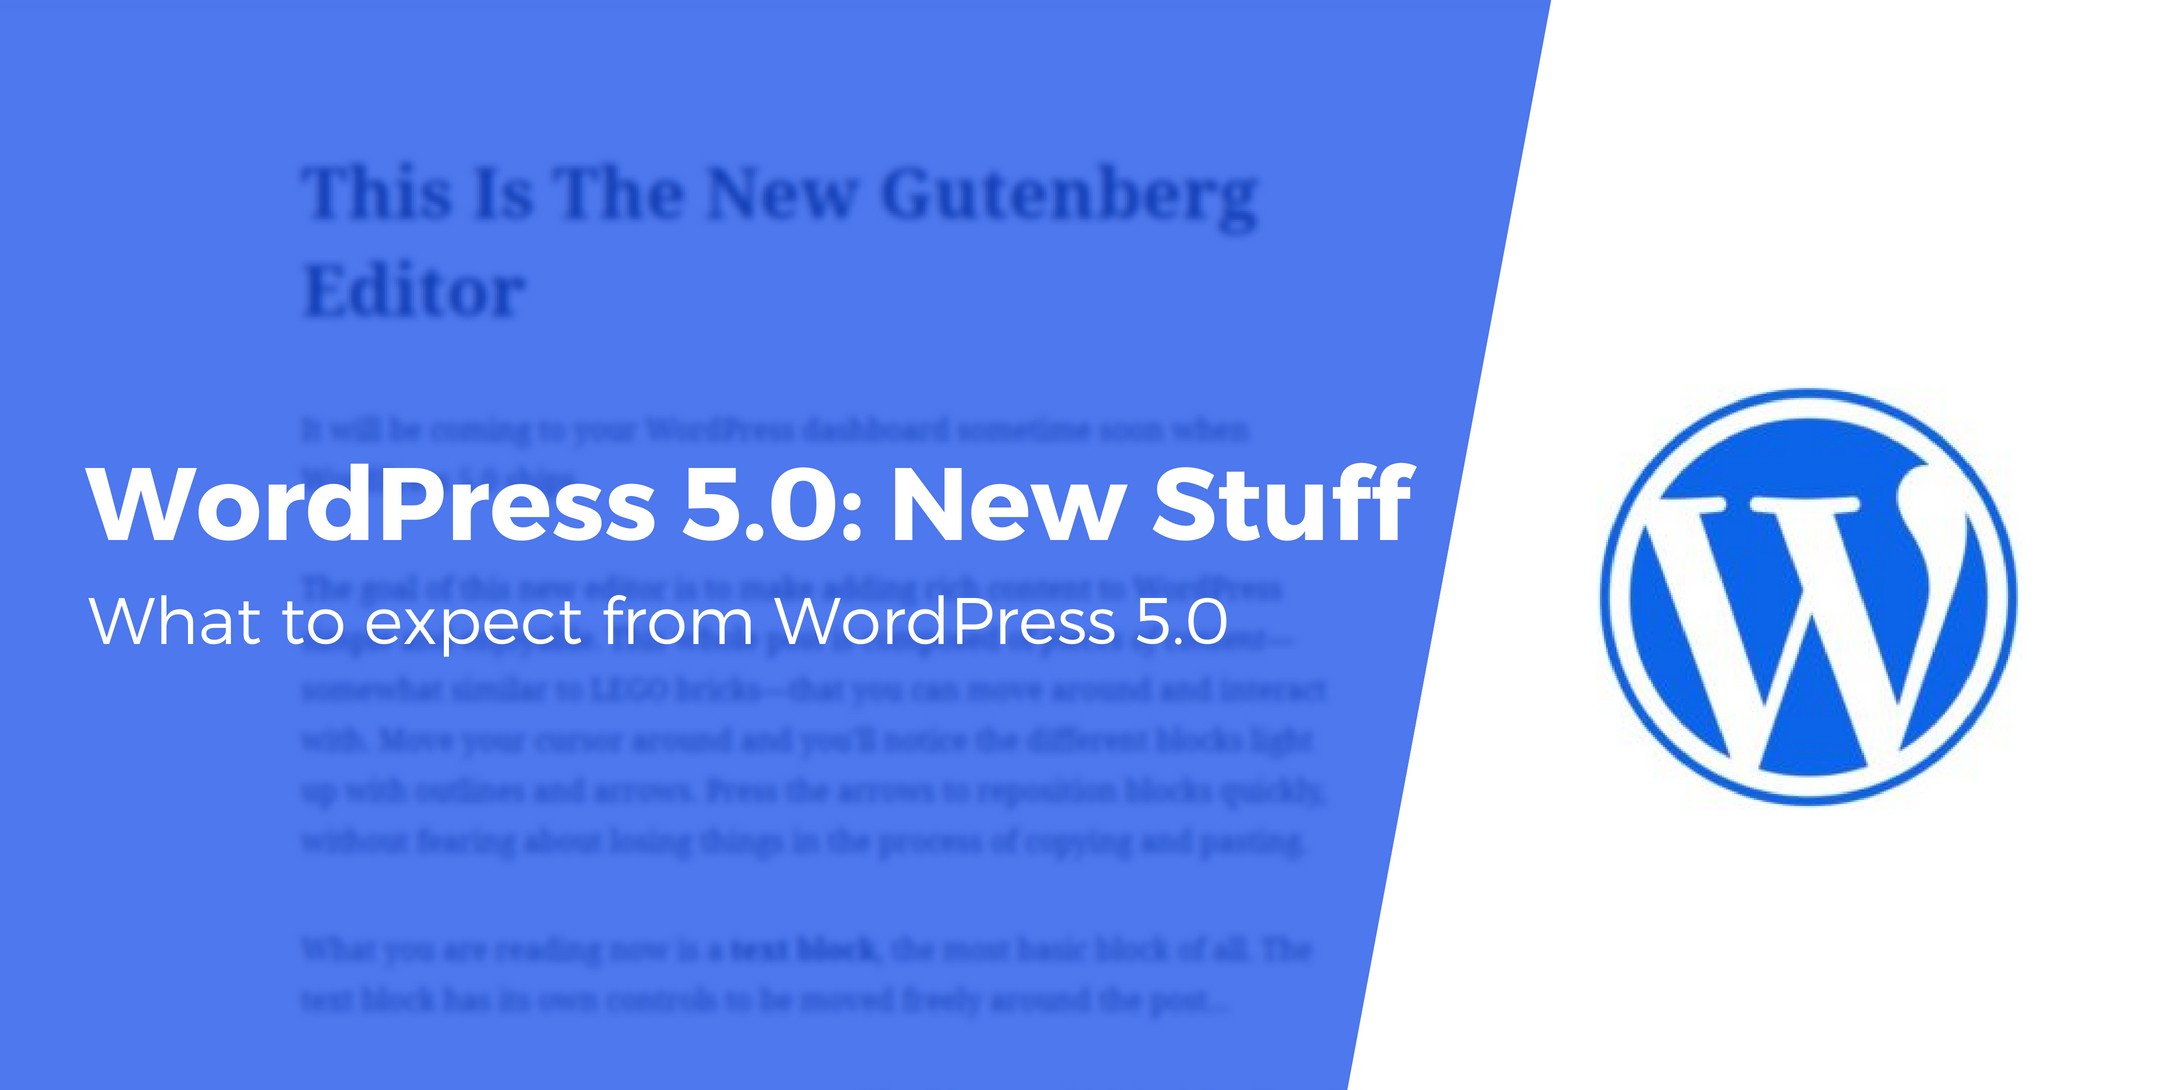 What’s New in WordPress 5.0, Plus What to Expect From the Block-Based Editor